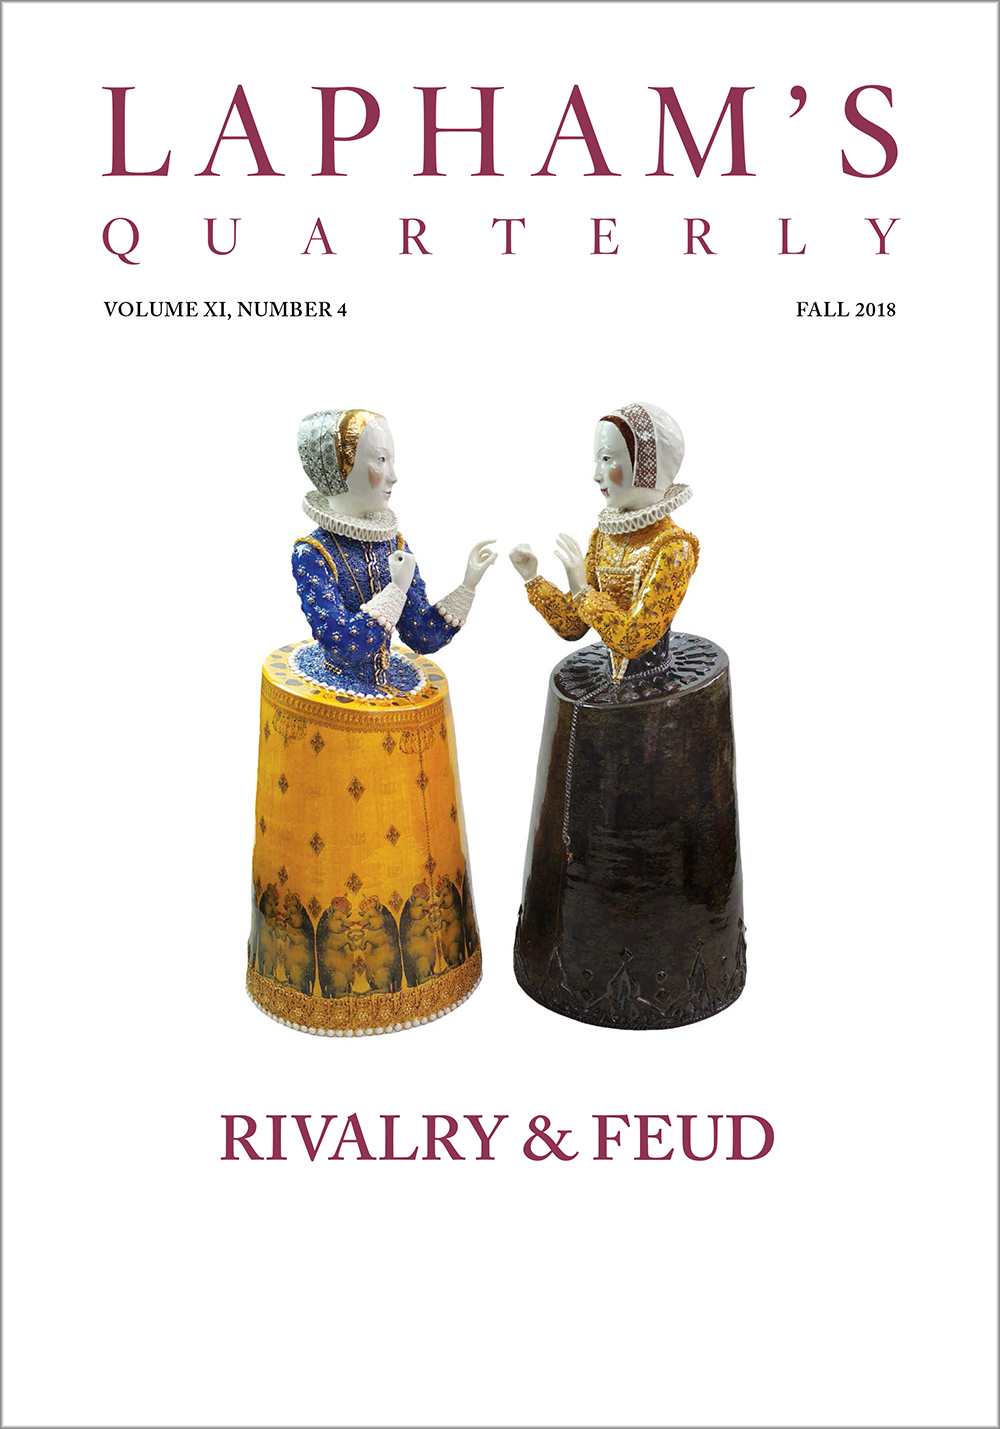 Rivalry & Feud, the Fall 2018 issue of Lapham’s Quarterly.